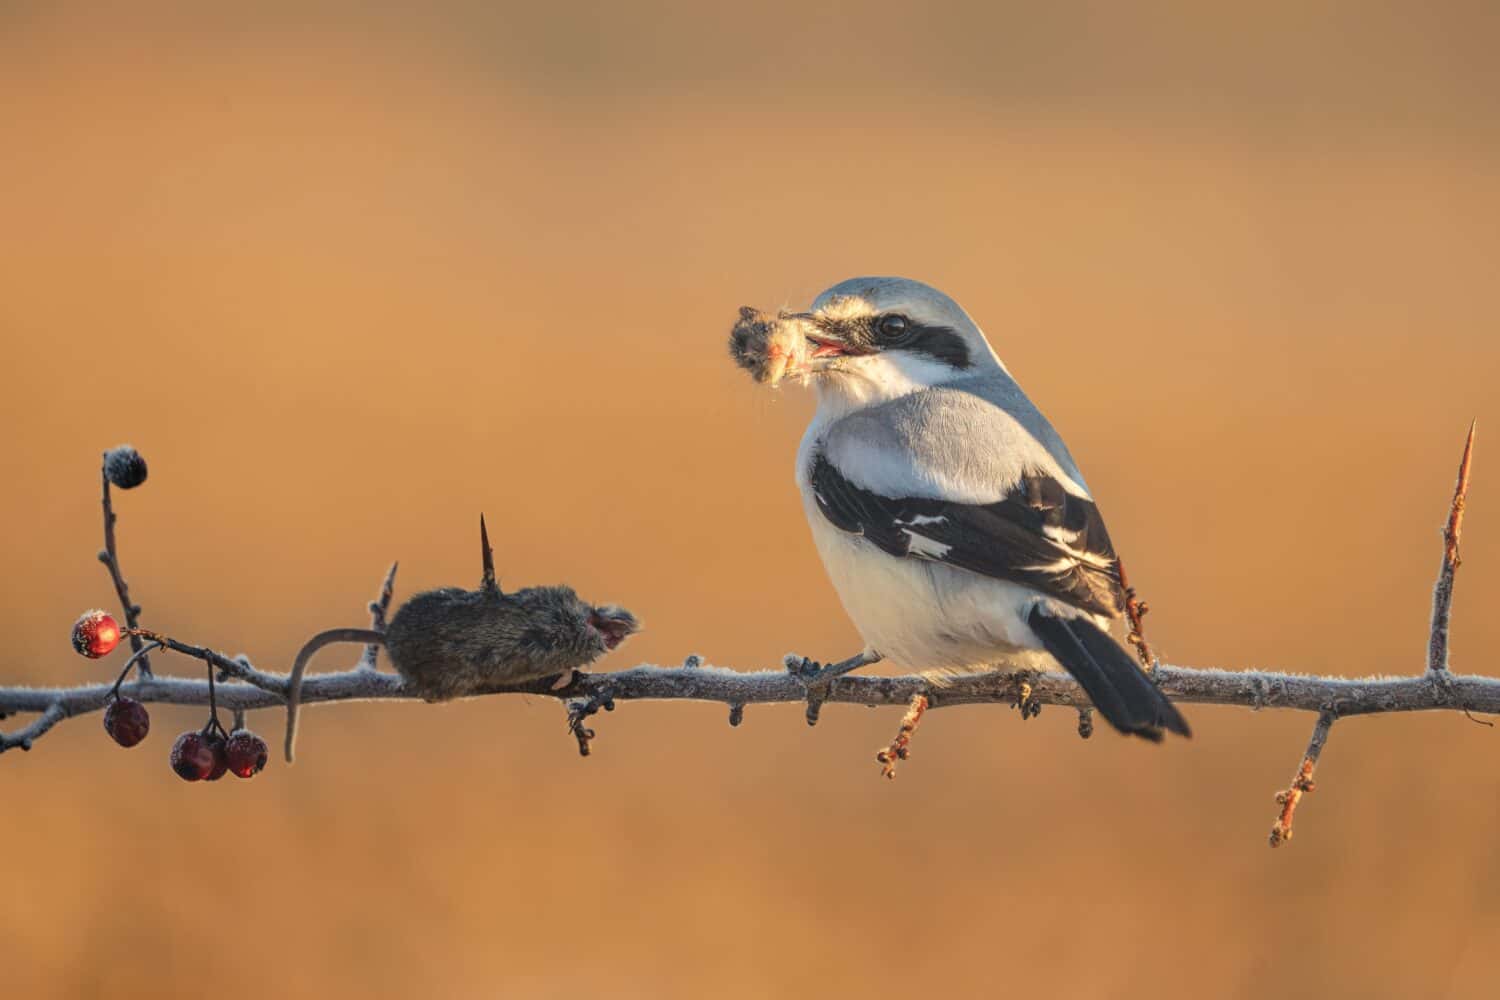 great grey shrike with its preys mouse head in mouth ready to eat it, beautiful light, stunning bird moment, epic scenery, orange sunlight